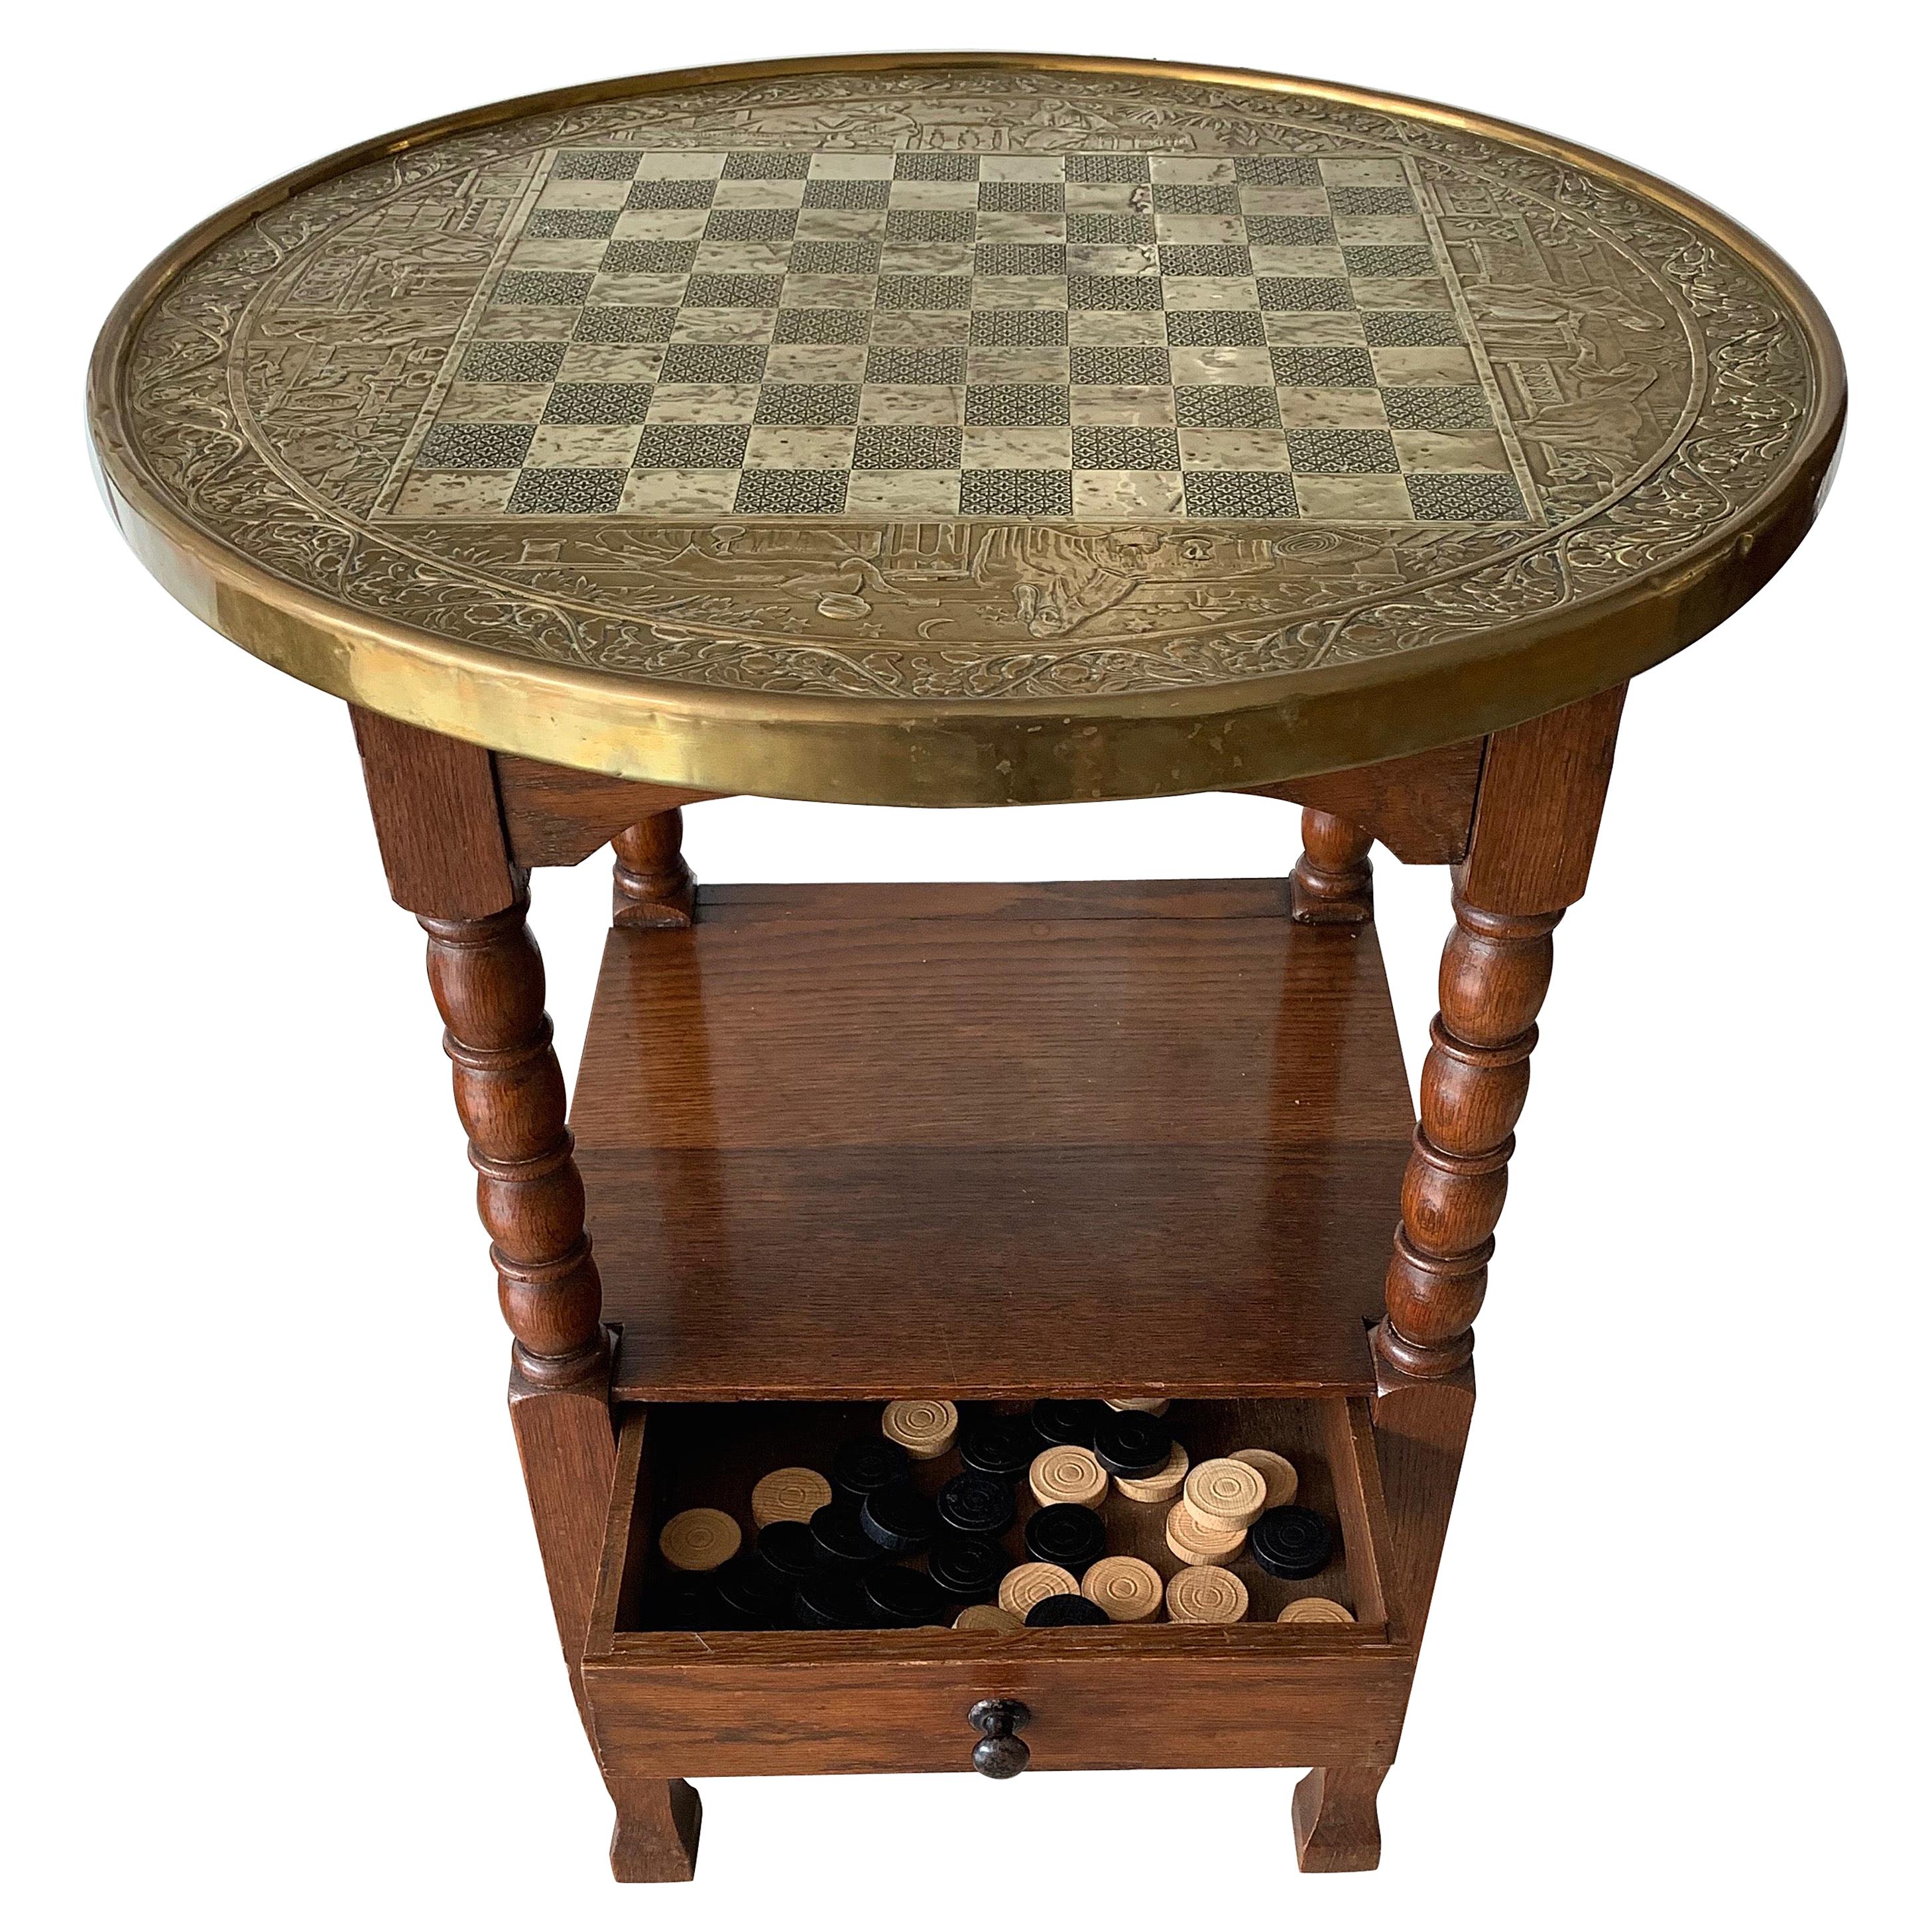 Early 1900s Dutch Arts & Crafts Checkers/Draughts Table with Embossed Brass Top